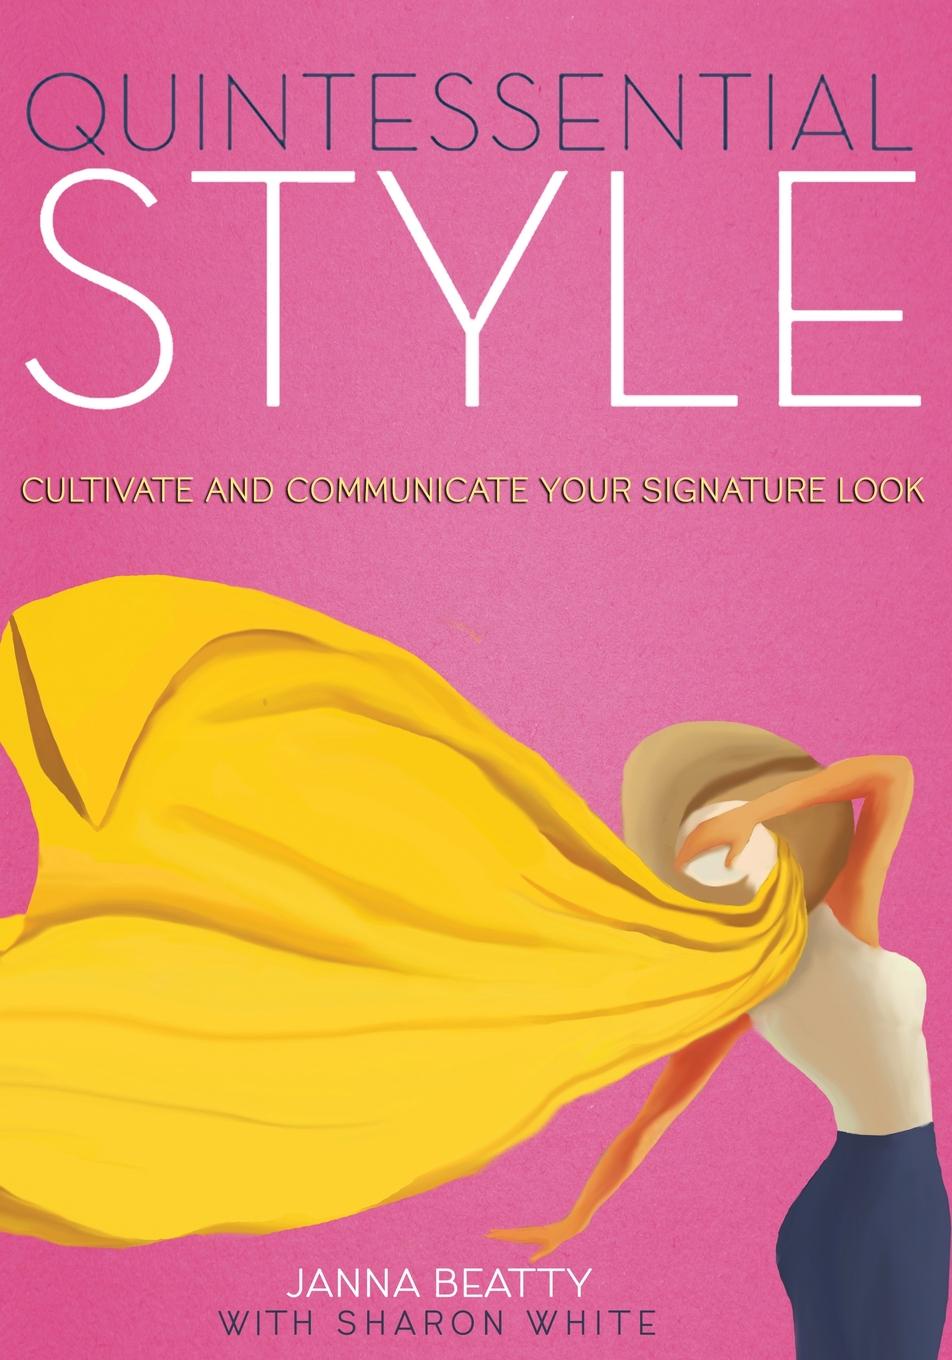 Quintessential Style. Cultivate and Communicate Your Signature Look